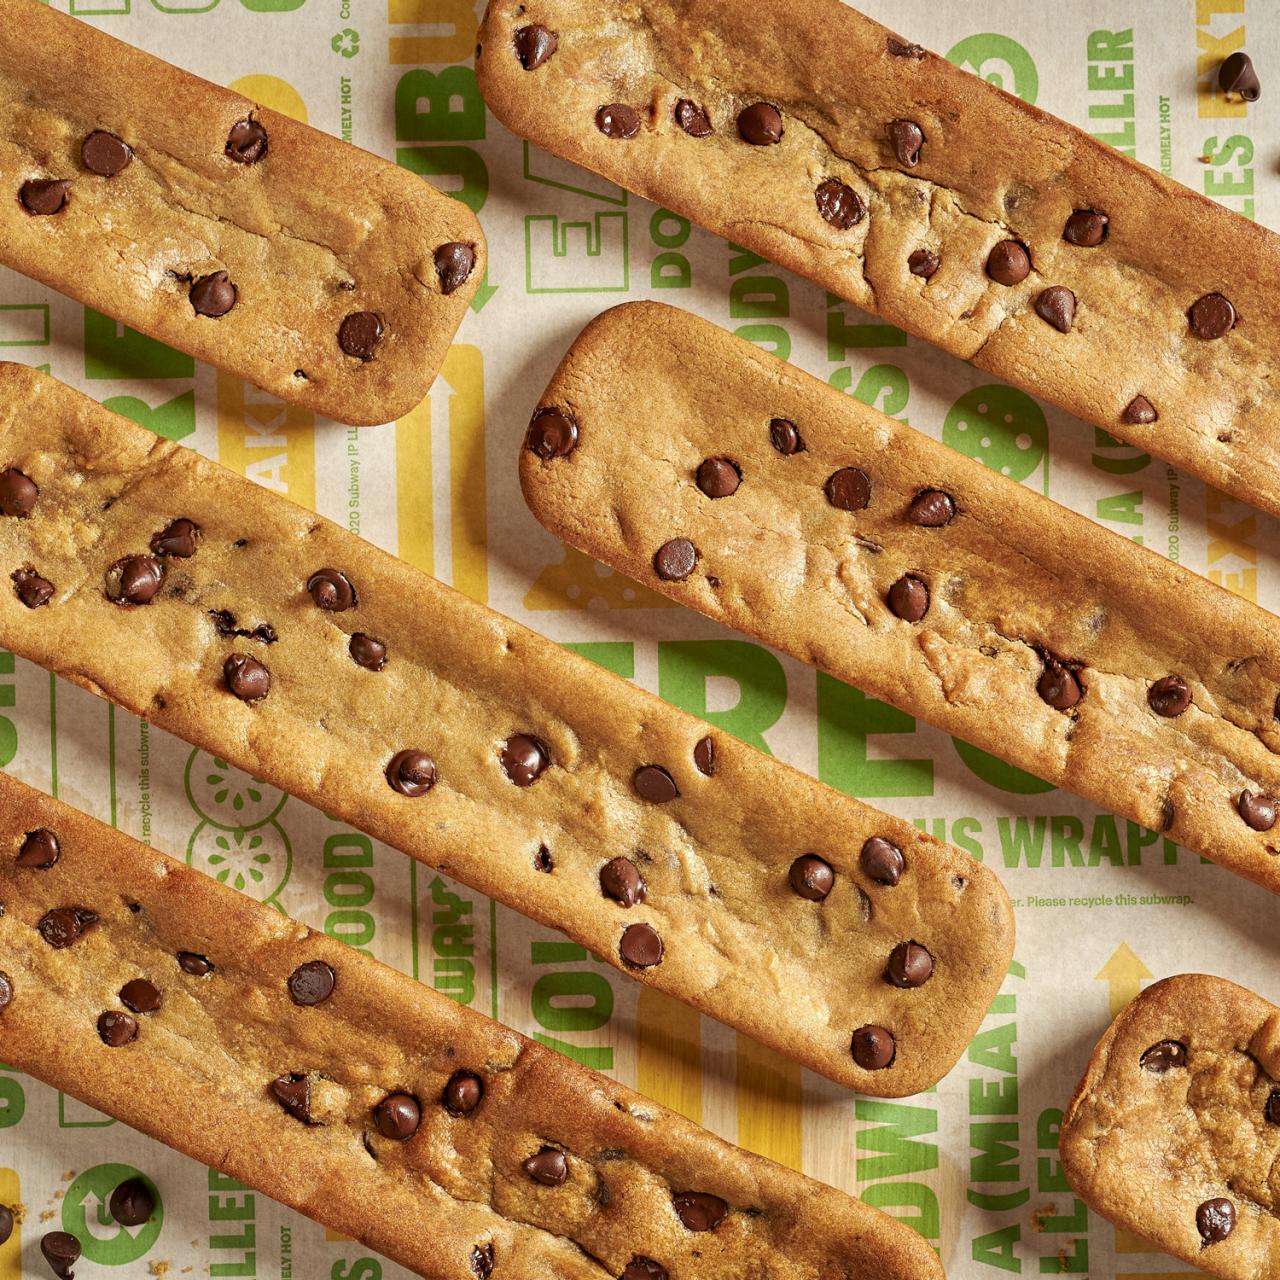 Subway Unveils the World's First Footlong Cookie Only Available on